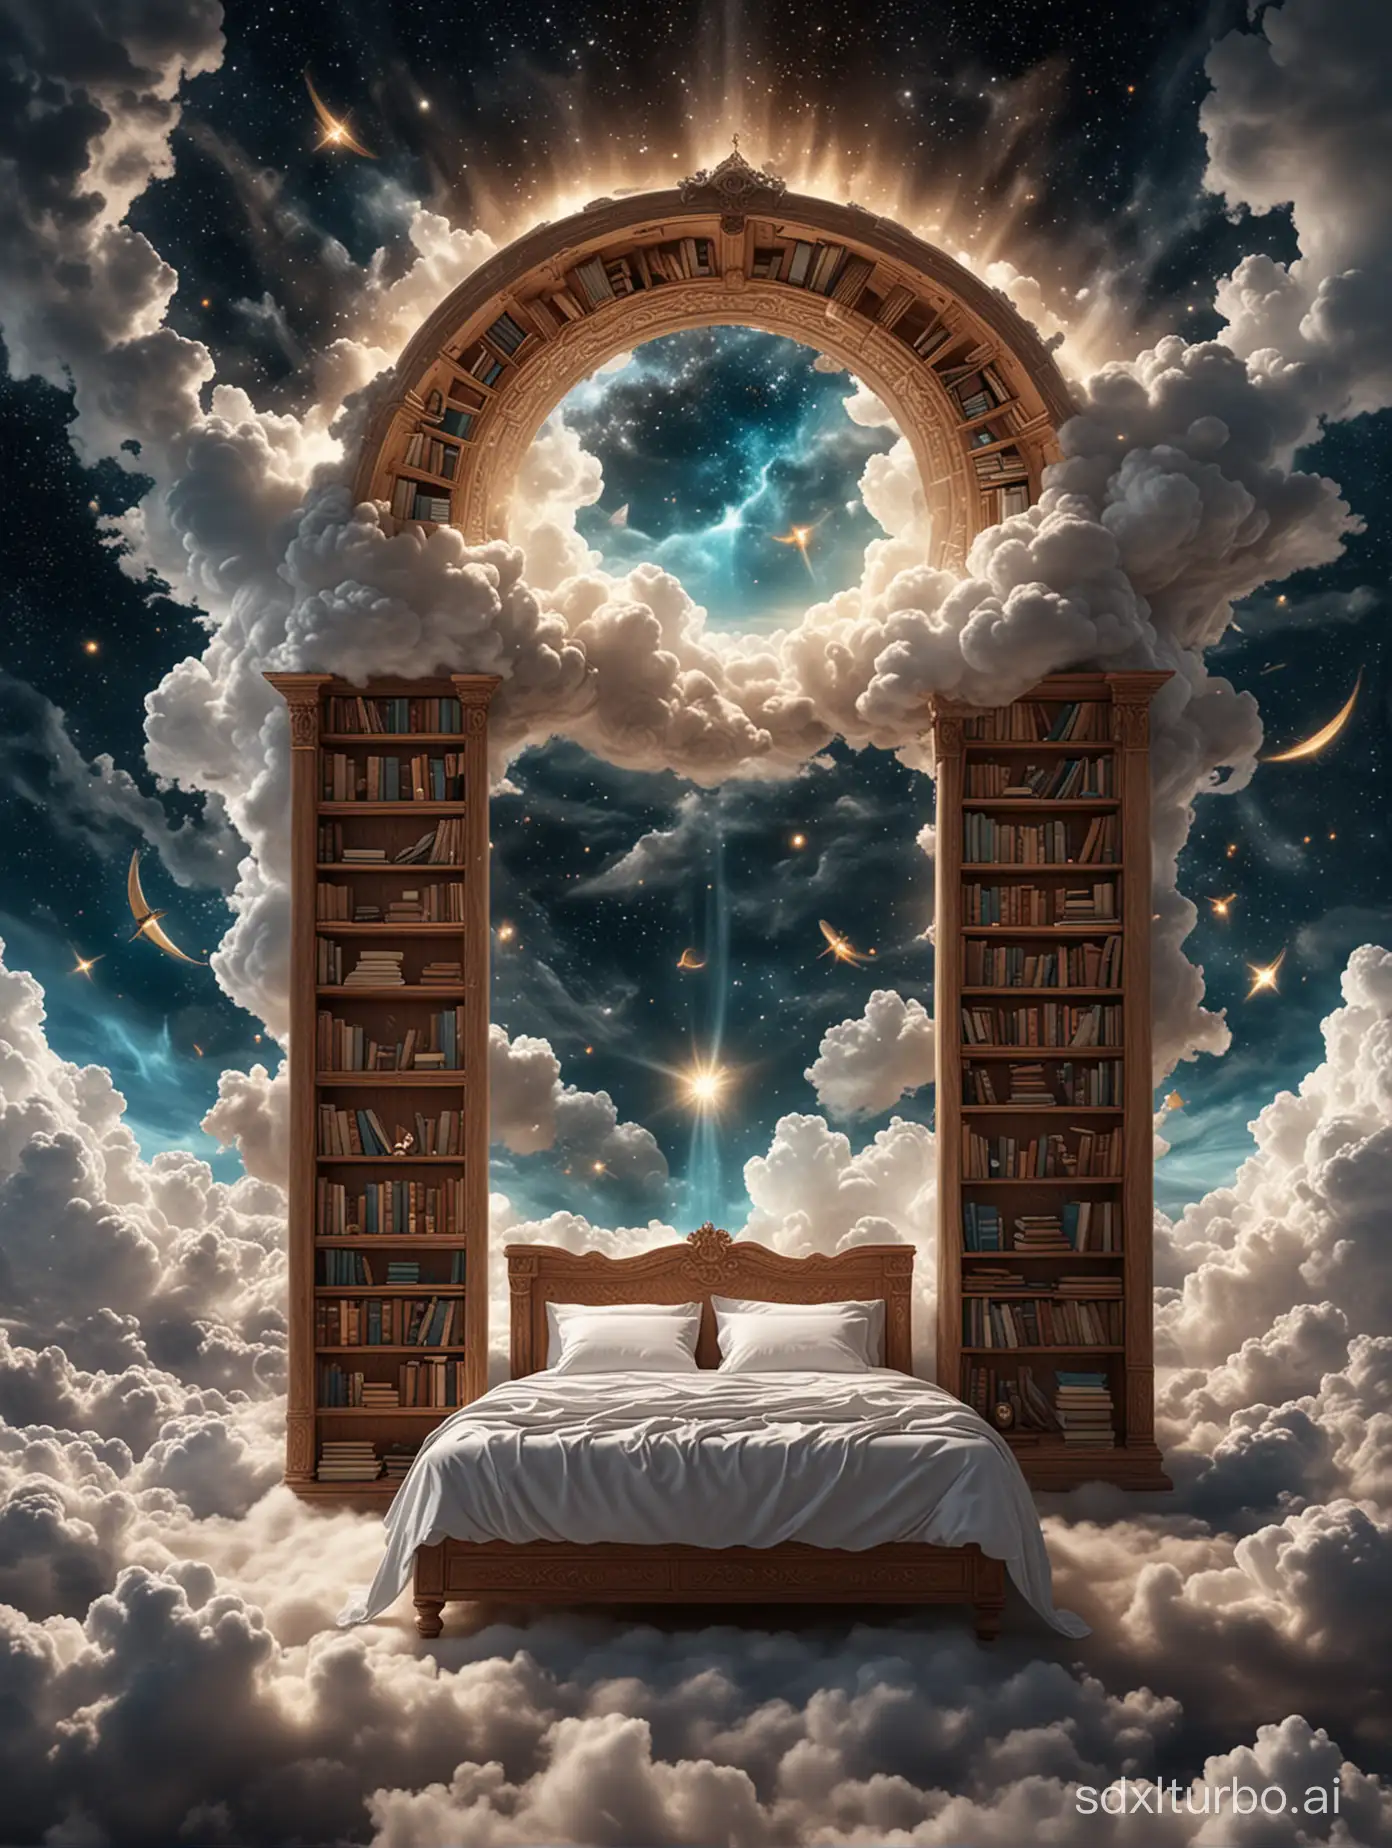 Create a dreamlike scene of a celestial bed hidden within the clouds, where towering bookshelves stretch endlessly into the heavens, filled with volumes of knowledge from across time and space, guarded by wise celestial beings.